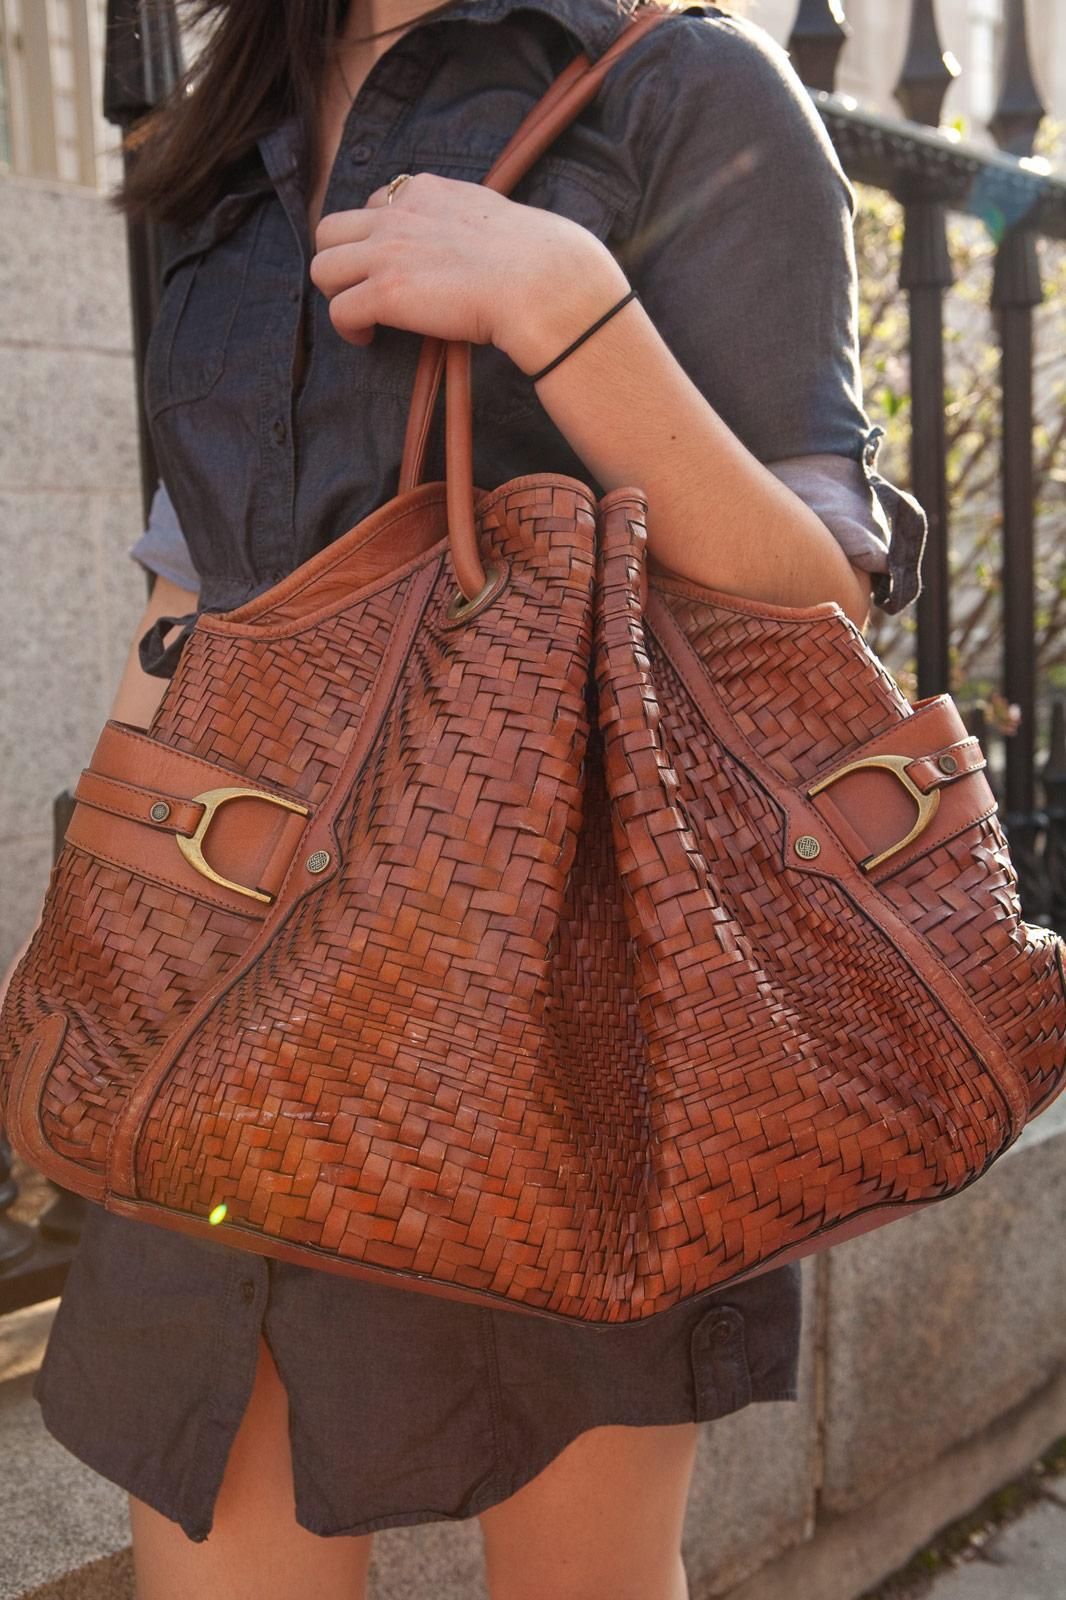 20 gorgeous bags we want for ourselves!